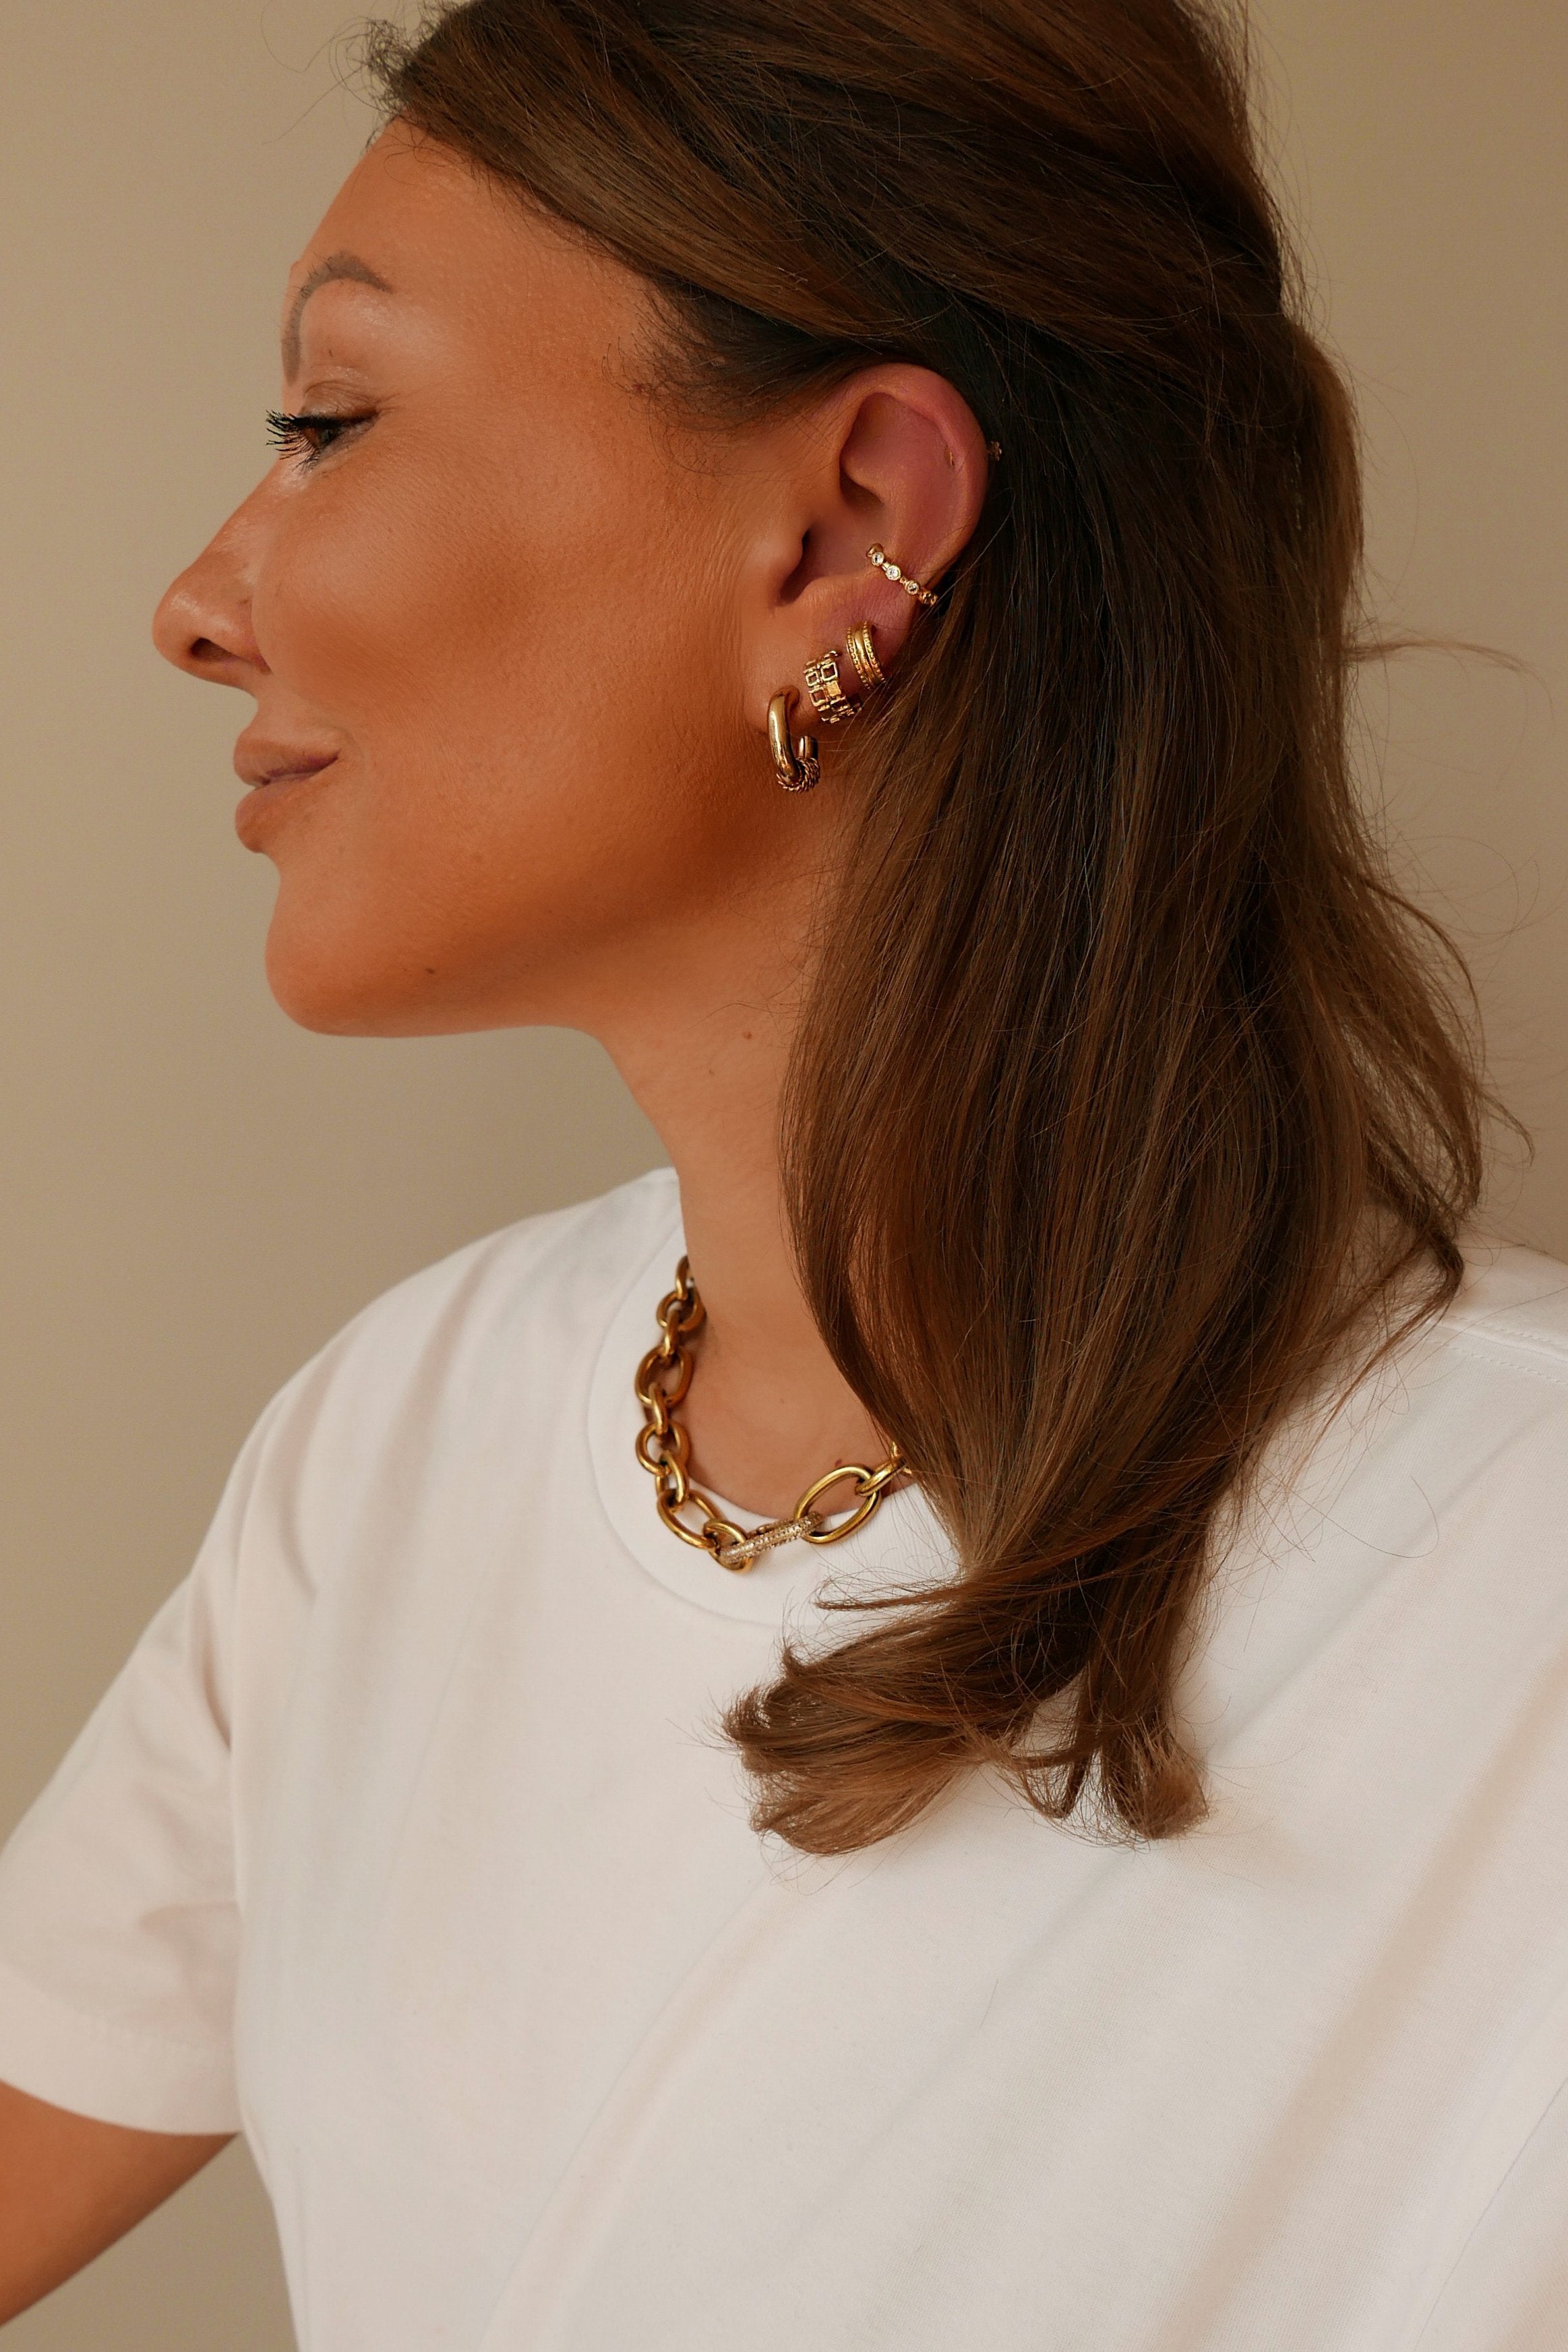 Hilda Ear Cuff - Boutique Minimaliste has waterproof, durable, elegant and vintage inspired jewelry